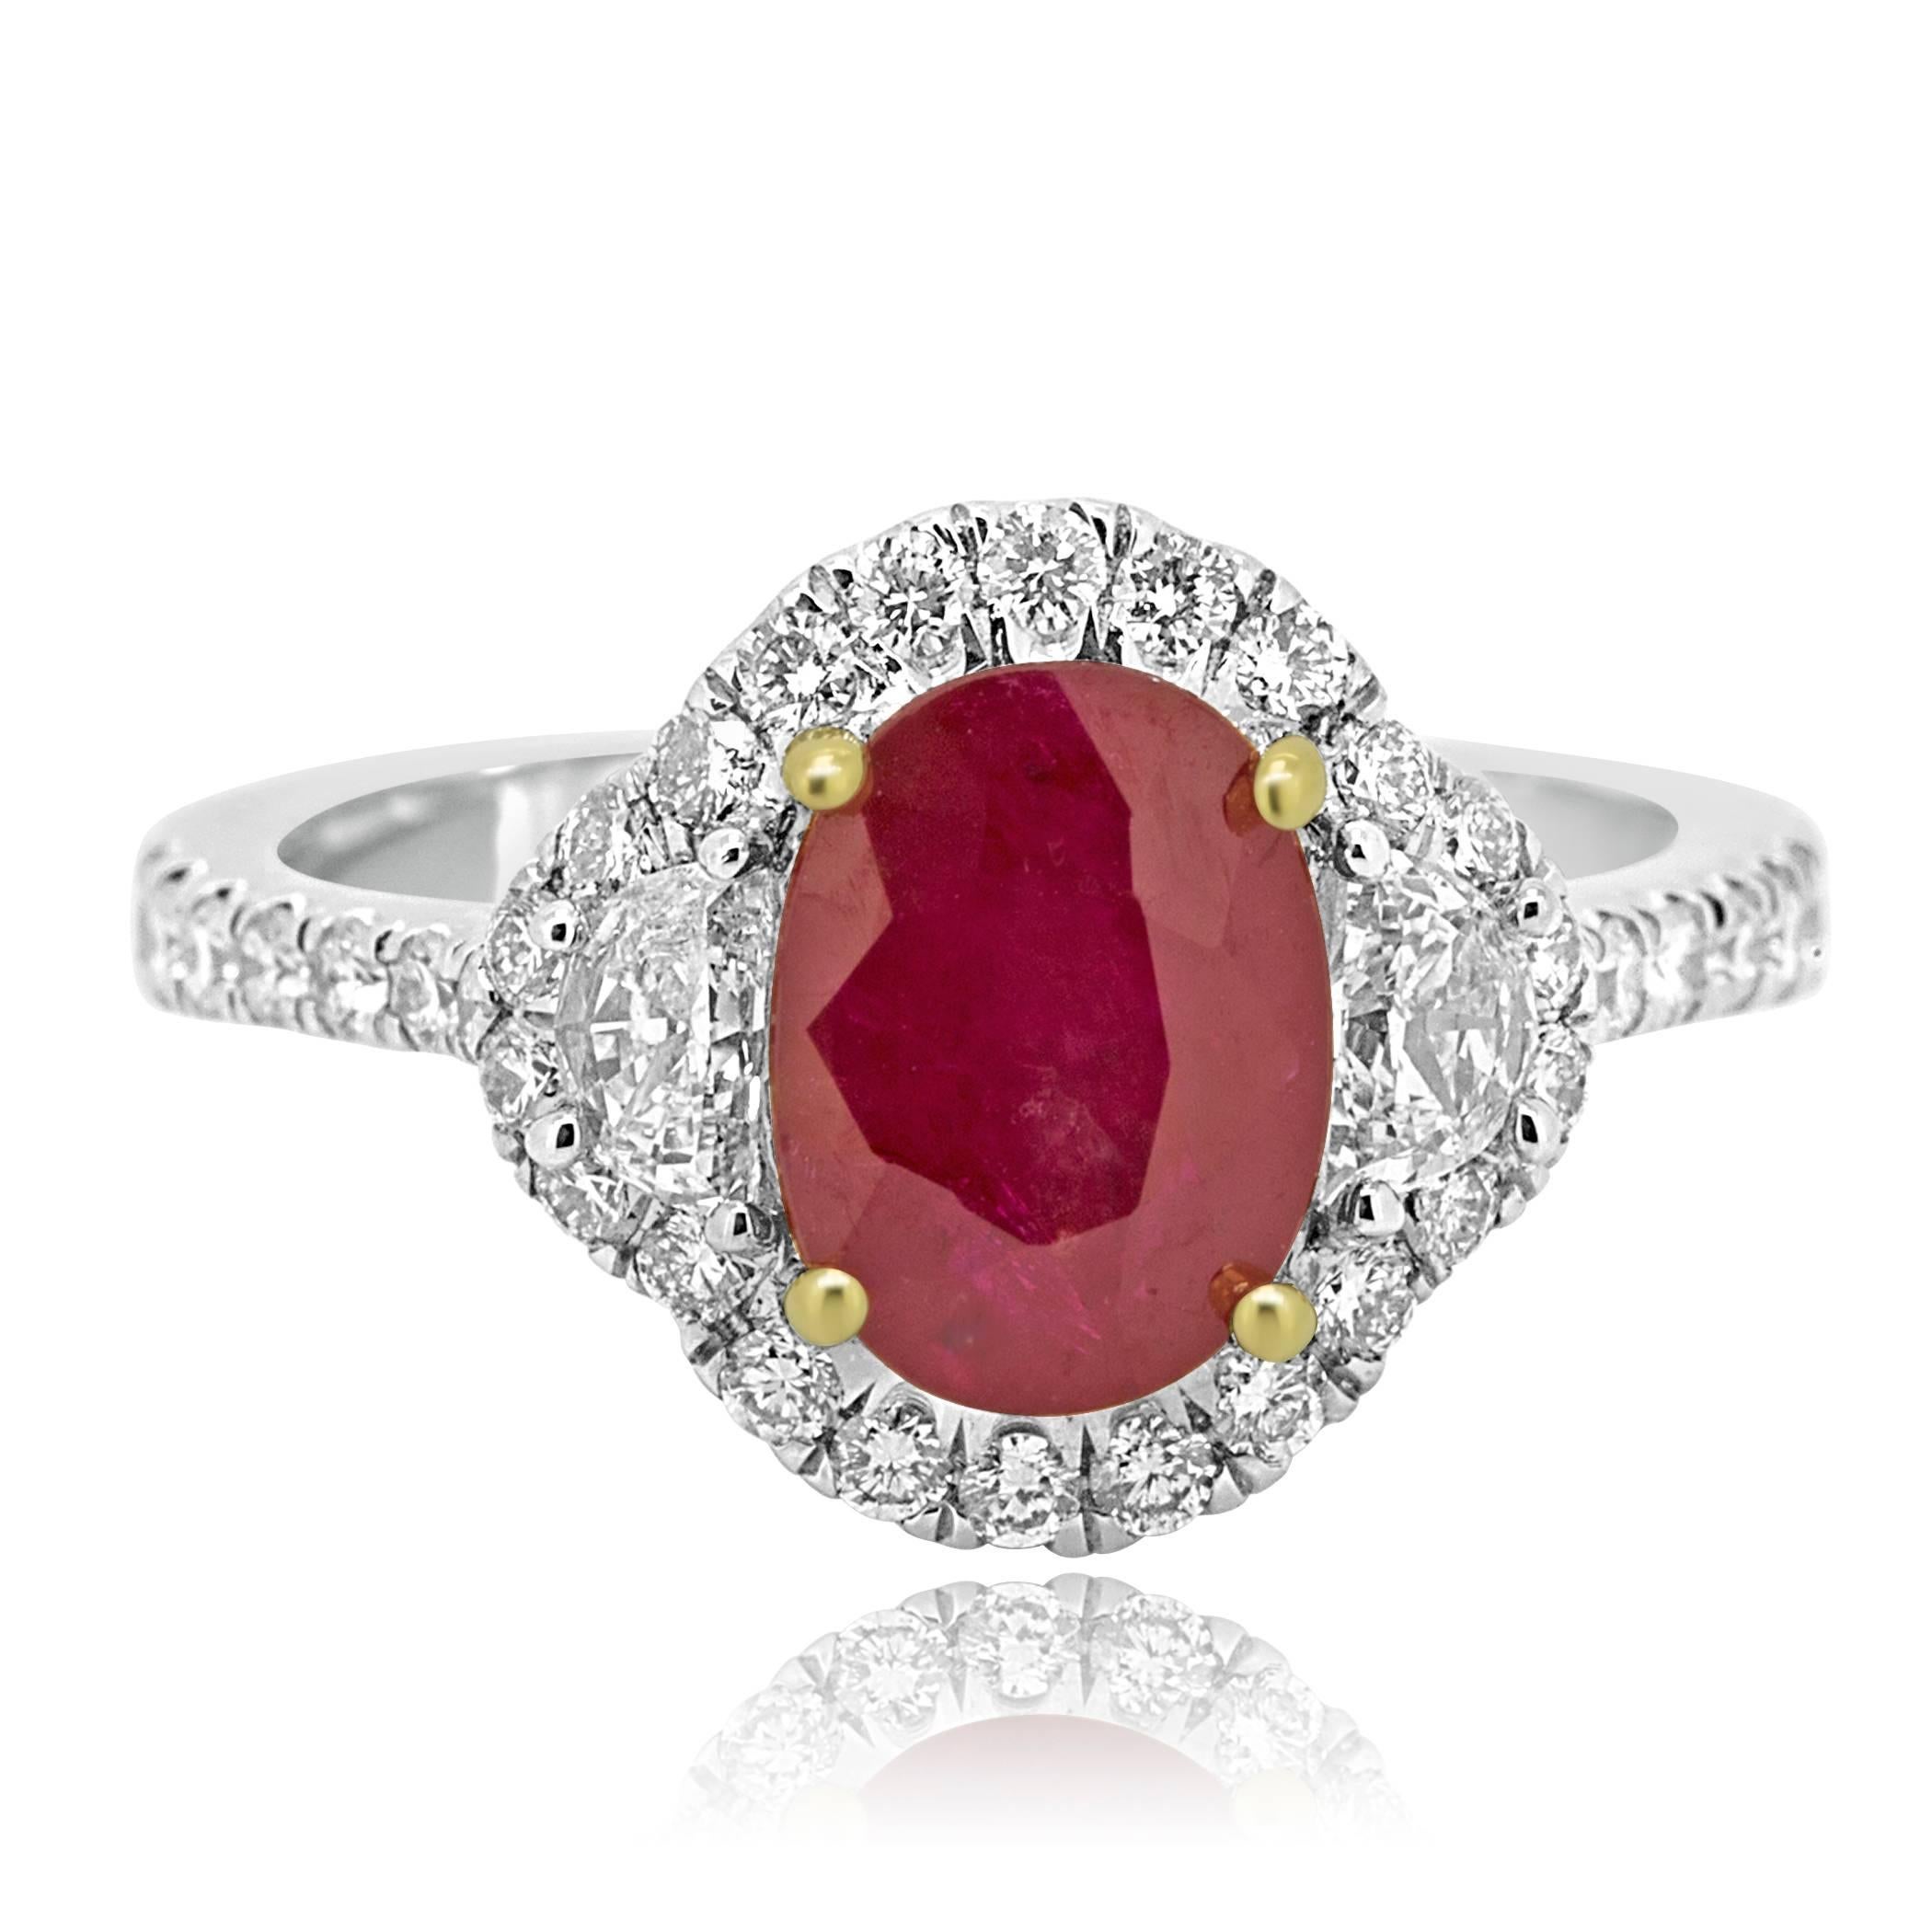 1 Ruby Oval 2.35 Carat encircled in Halo of White Colorless VS-SI Clarity Round Diamond 0.57 Carat Flanked by 2 Half moon G-H Color VS-SI  Diamonds 0.32 Carat in 18K White and Yellow Gold Three Stone Bridal Fashion Cocktail Ring. 

Style available